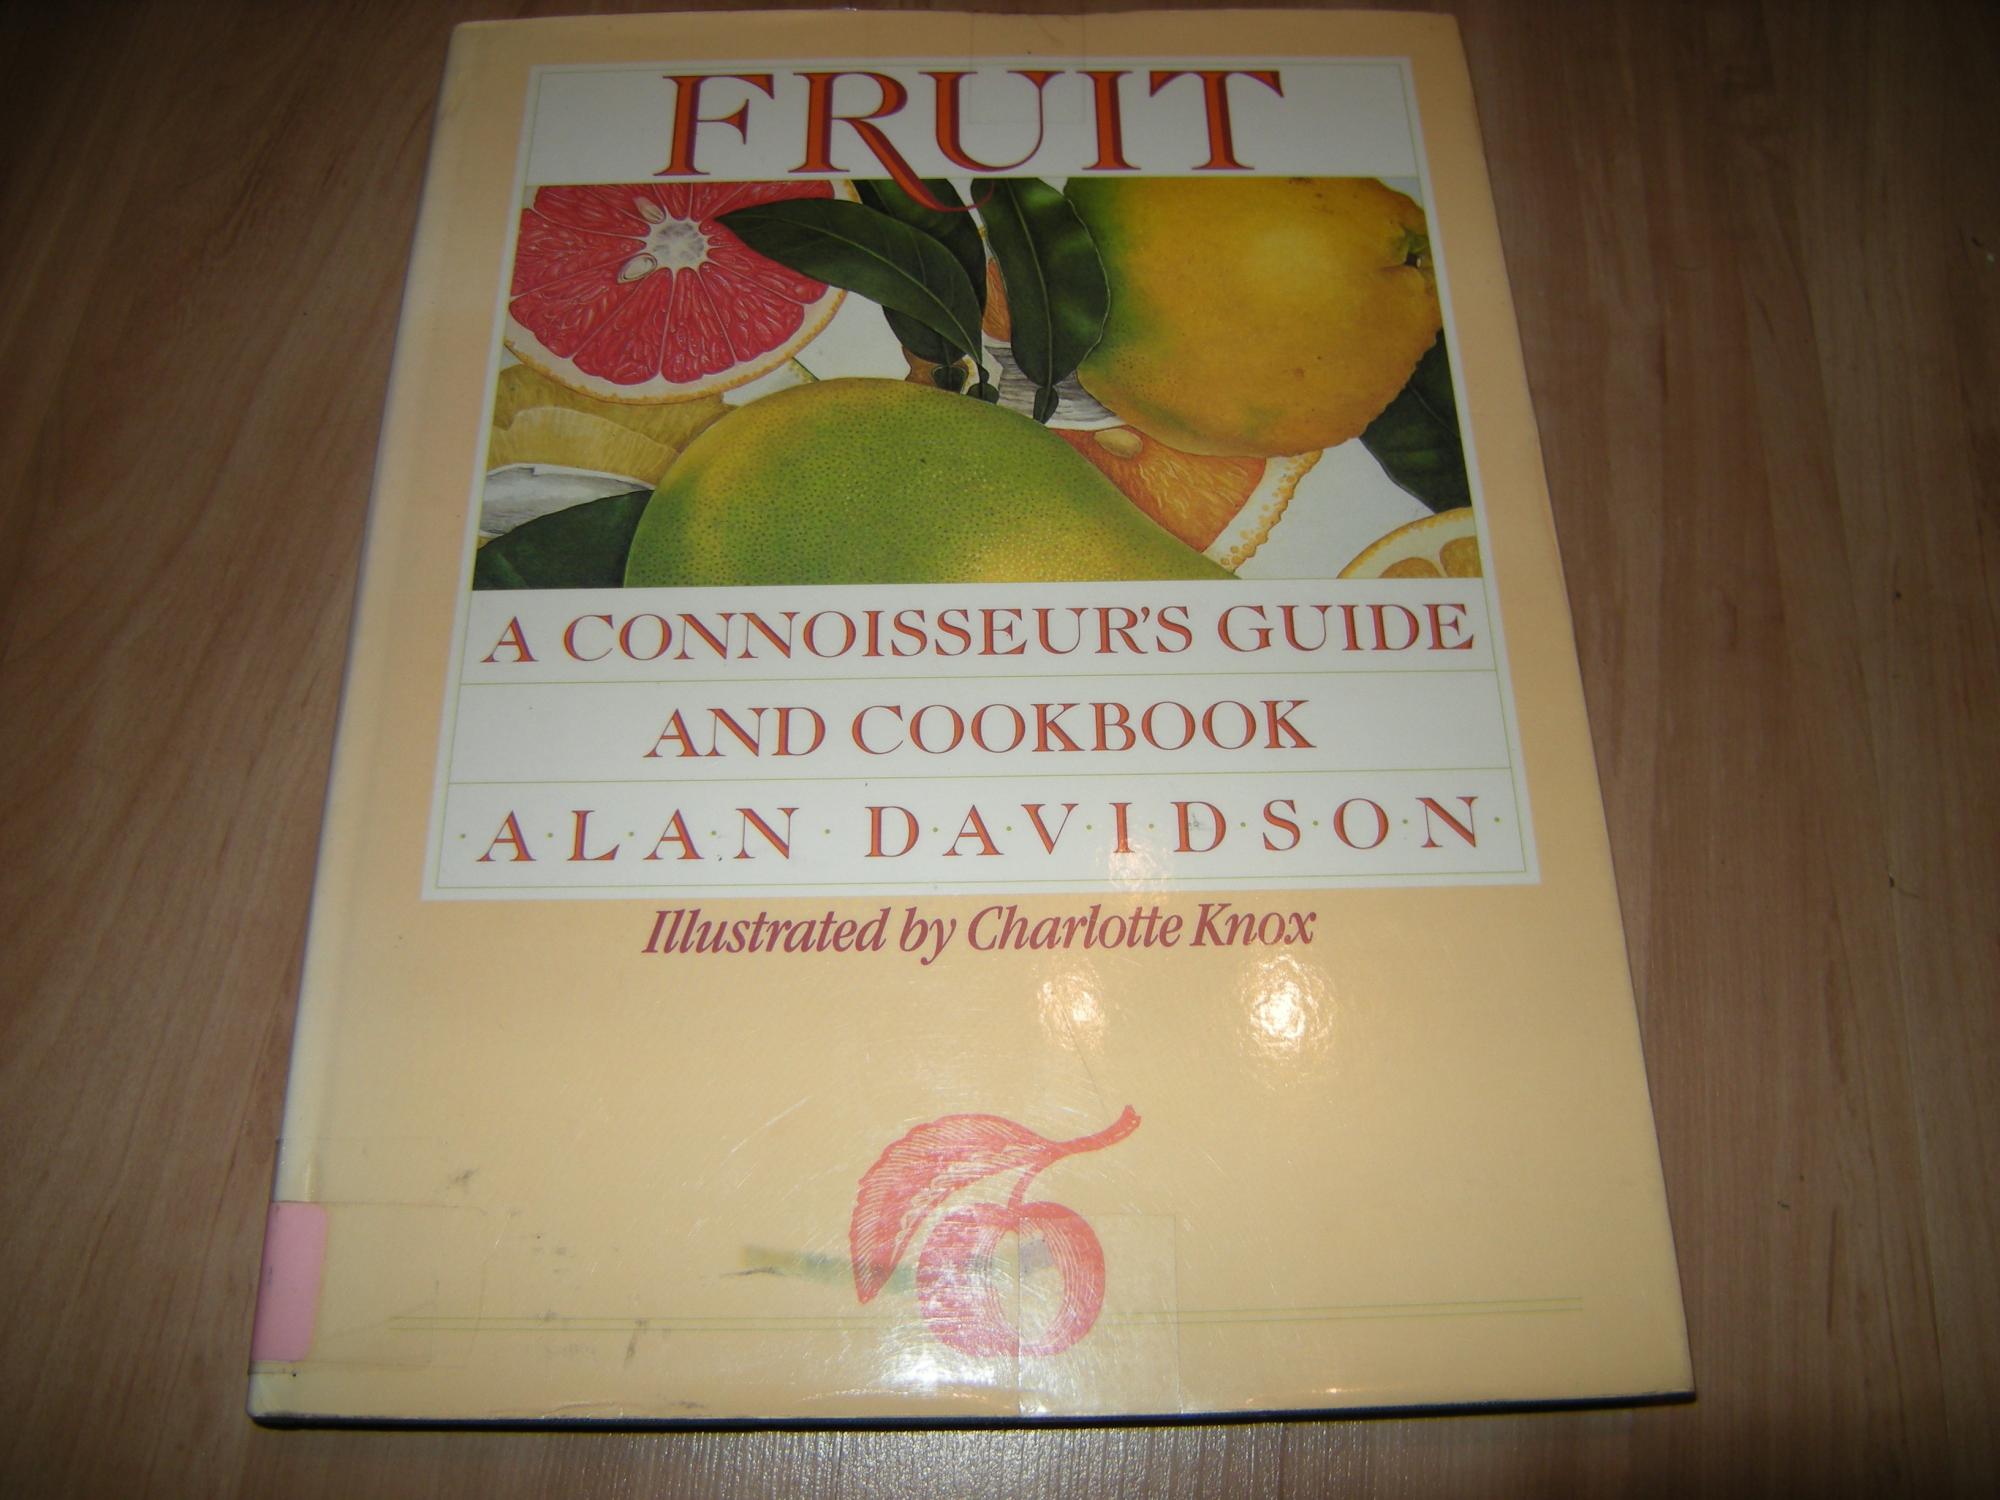 Fruit: A Connoisseur's Guide and Cookbook